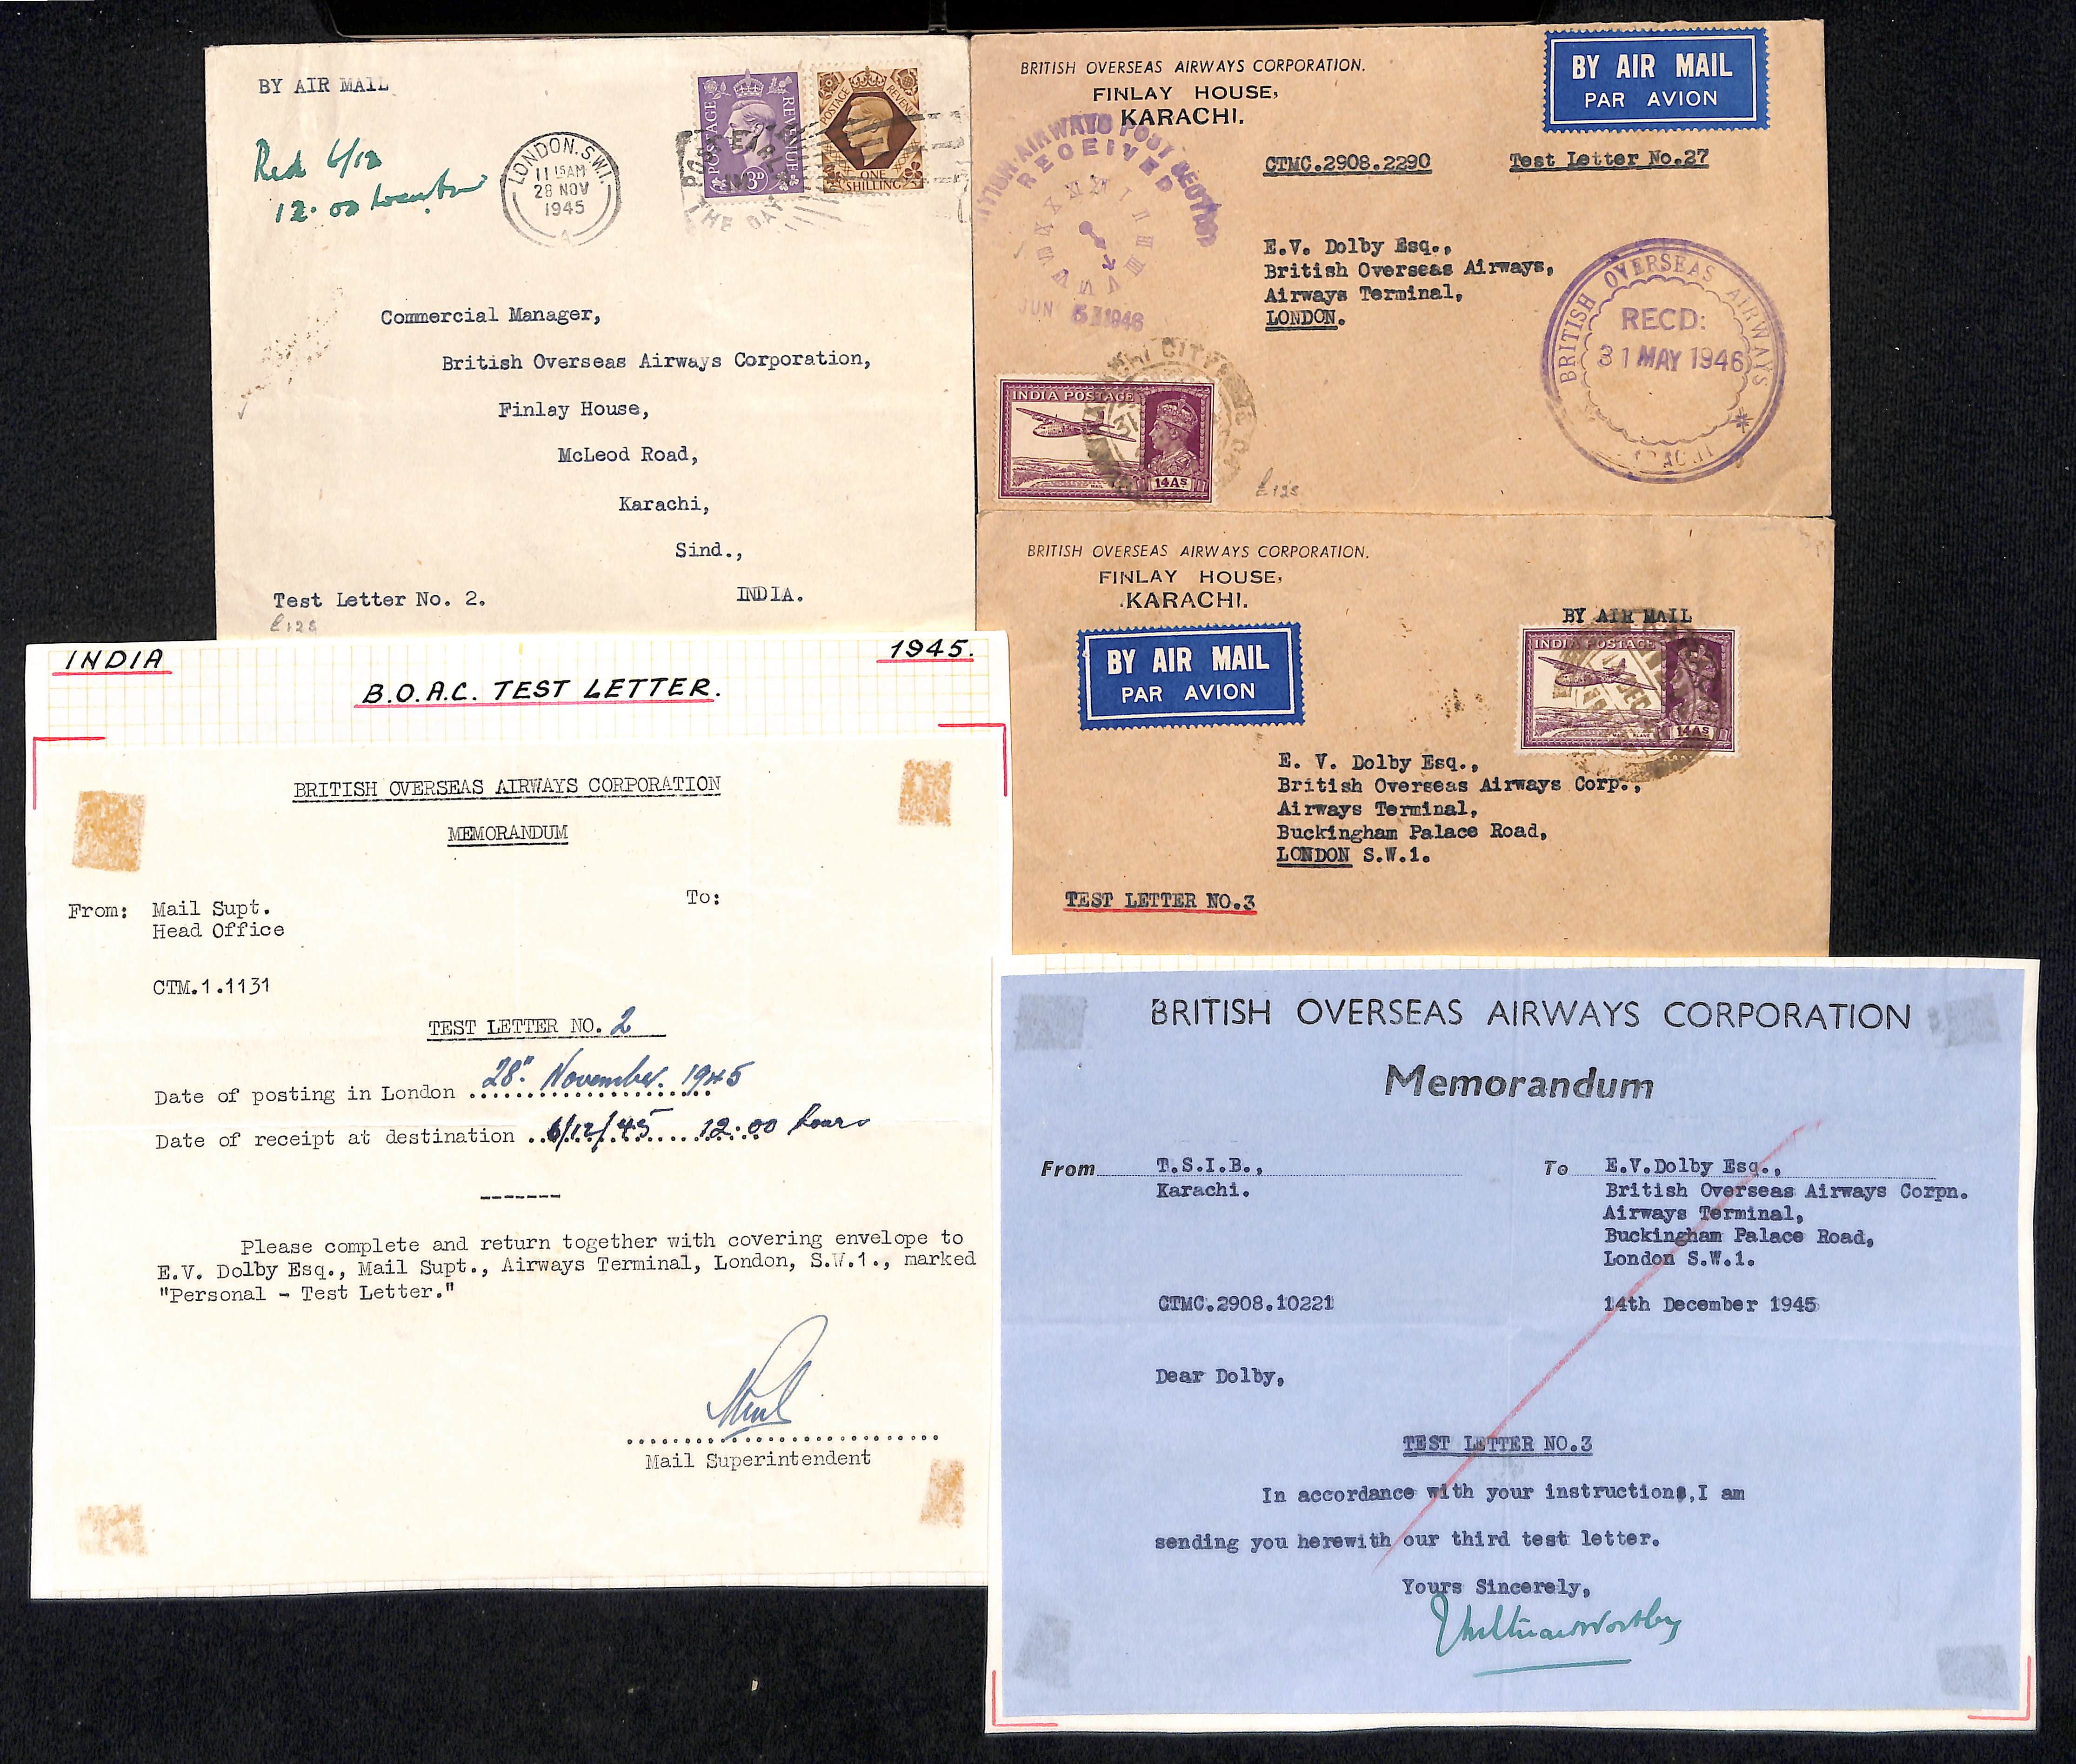 1945-46 B.O.A.C Test letters, 1945 (Nov 28) Cover from London to Karachi with enclosed test letter